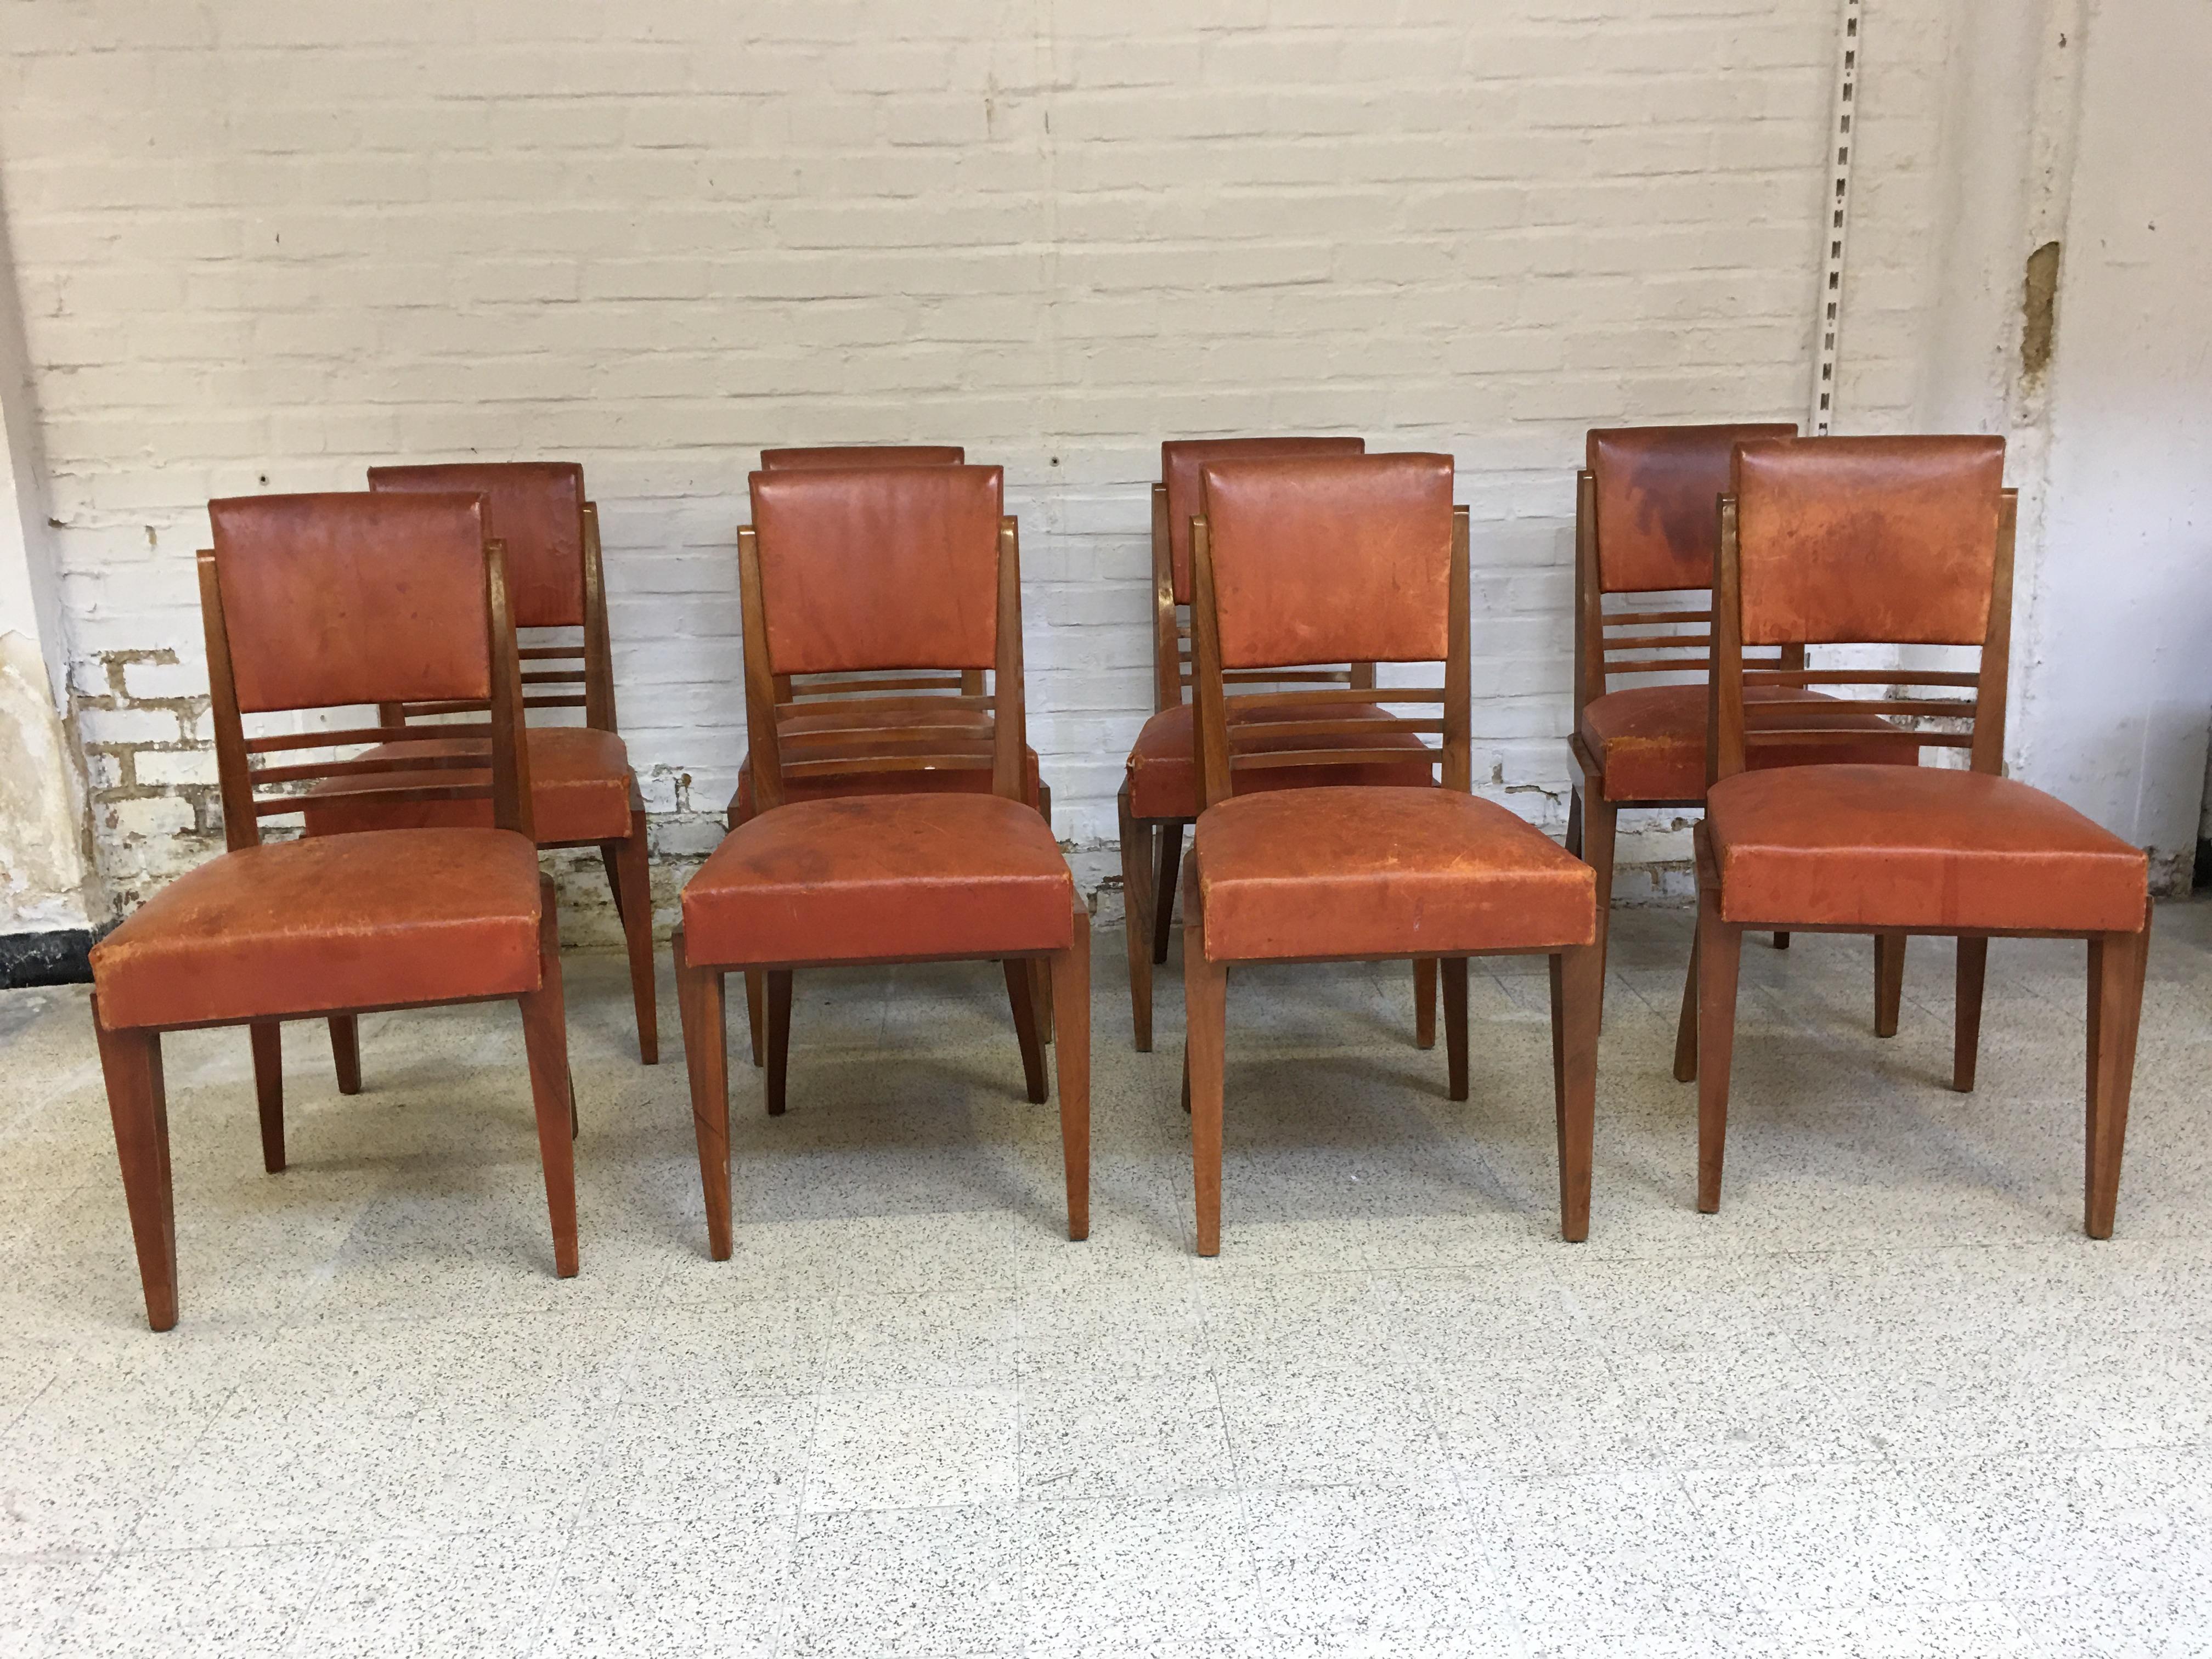 Rare suite of 8 Art Deco chairs and 2 mahogany and leather armchairs in the style of Maxime Old, circa 1930-1940.
Dimensions in centimeters
Armchairs: H 90, SH 48, W 54, D 50
Chairs: H 90, SH 48, W 48, D 46.